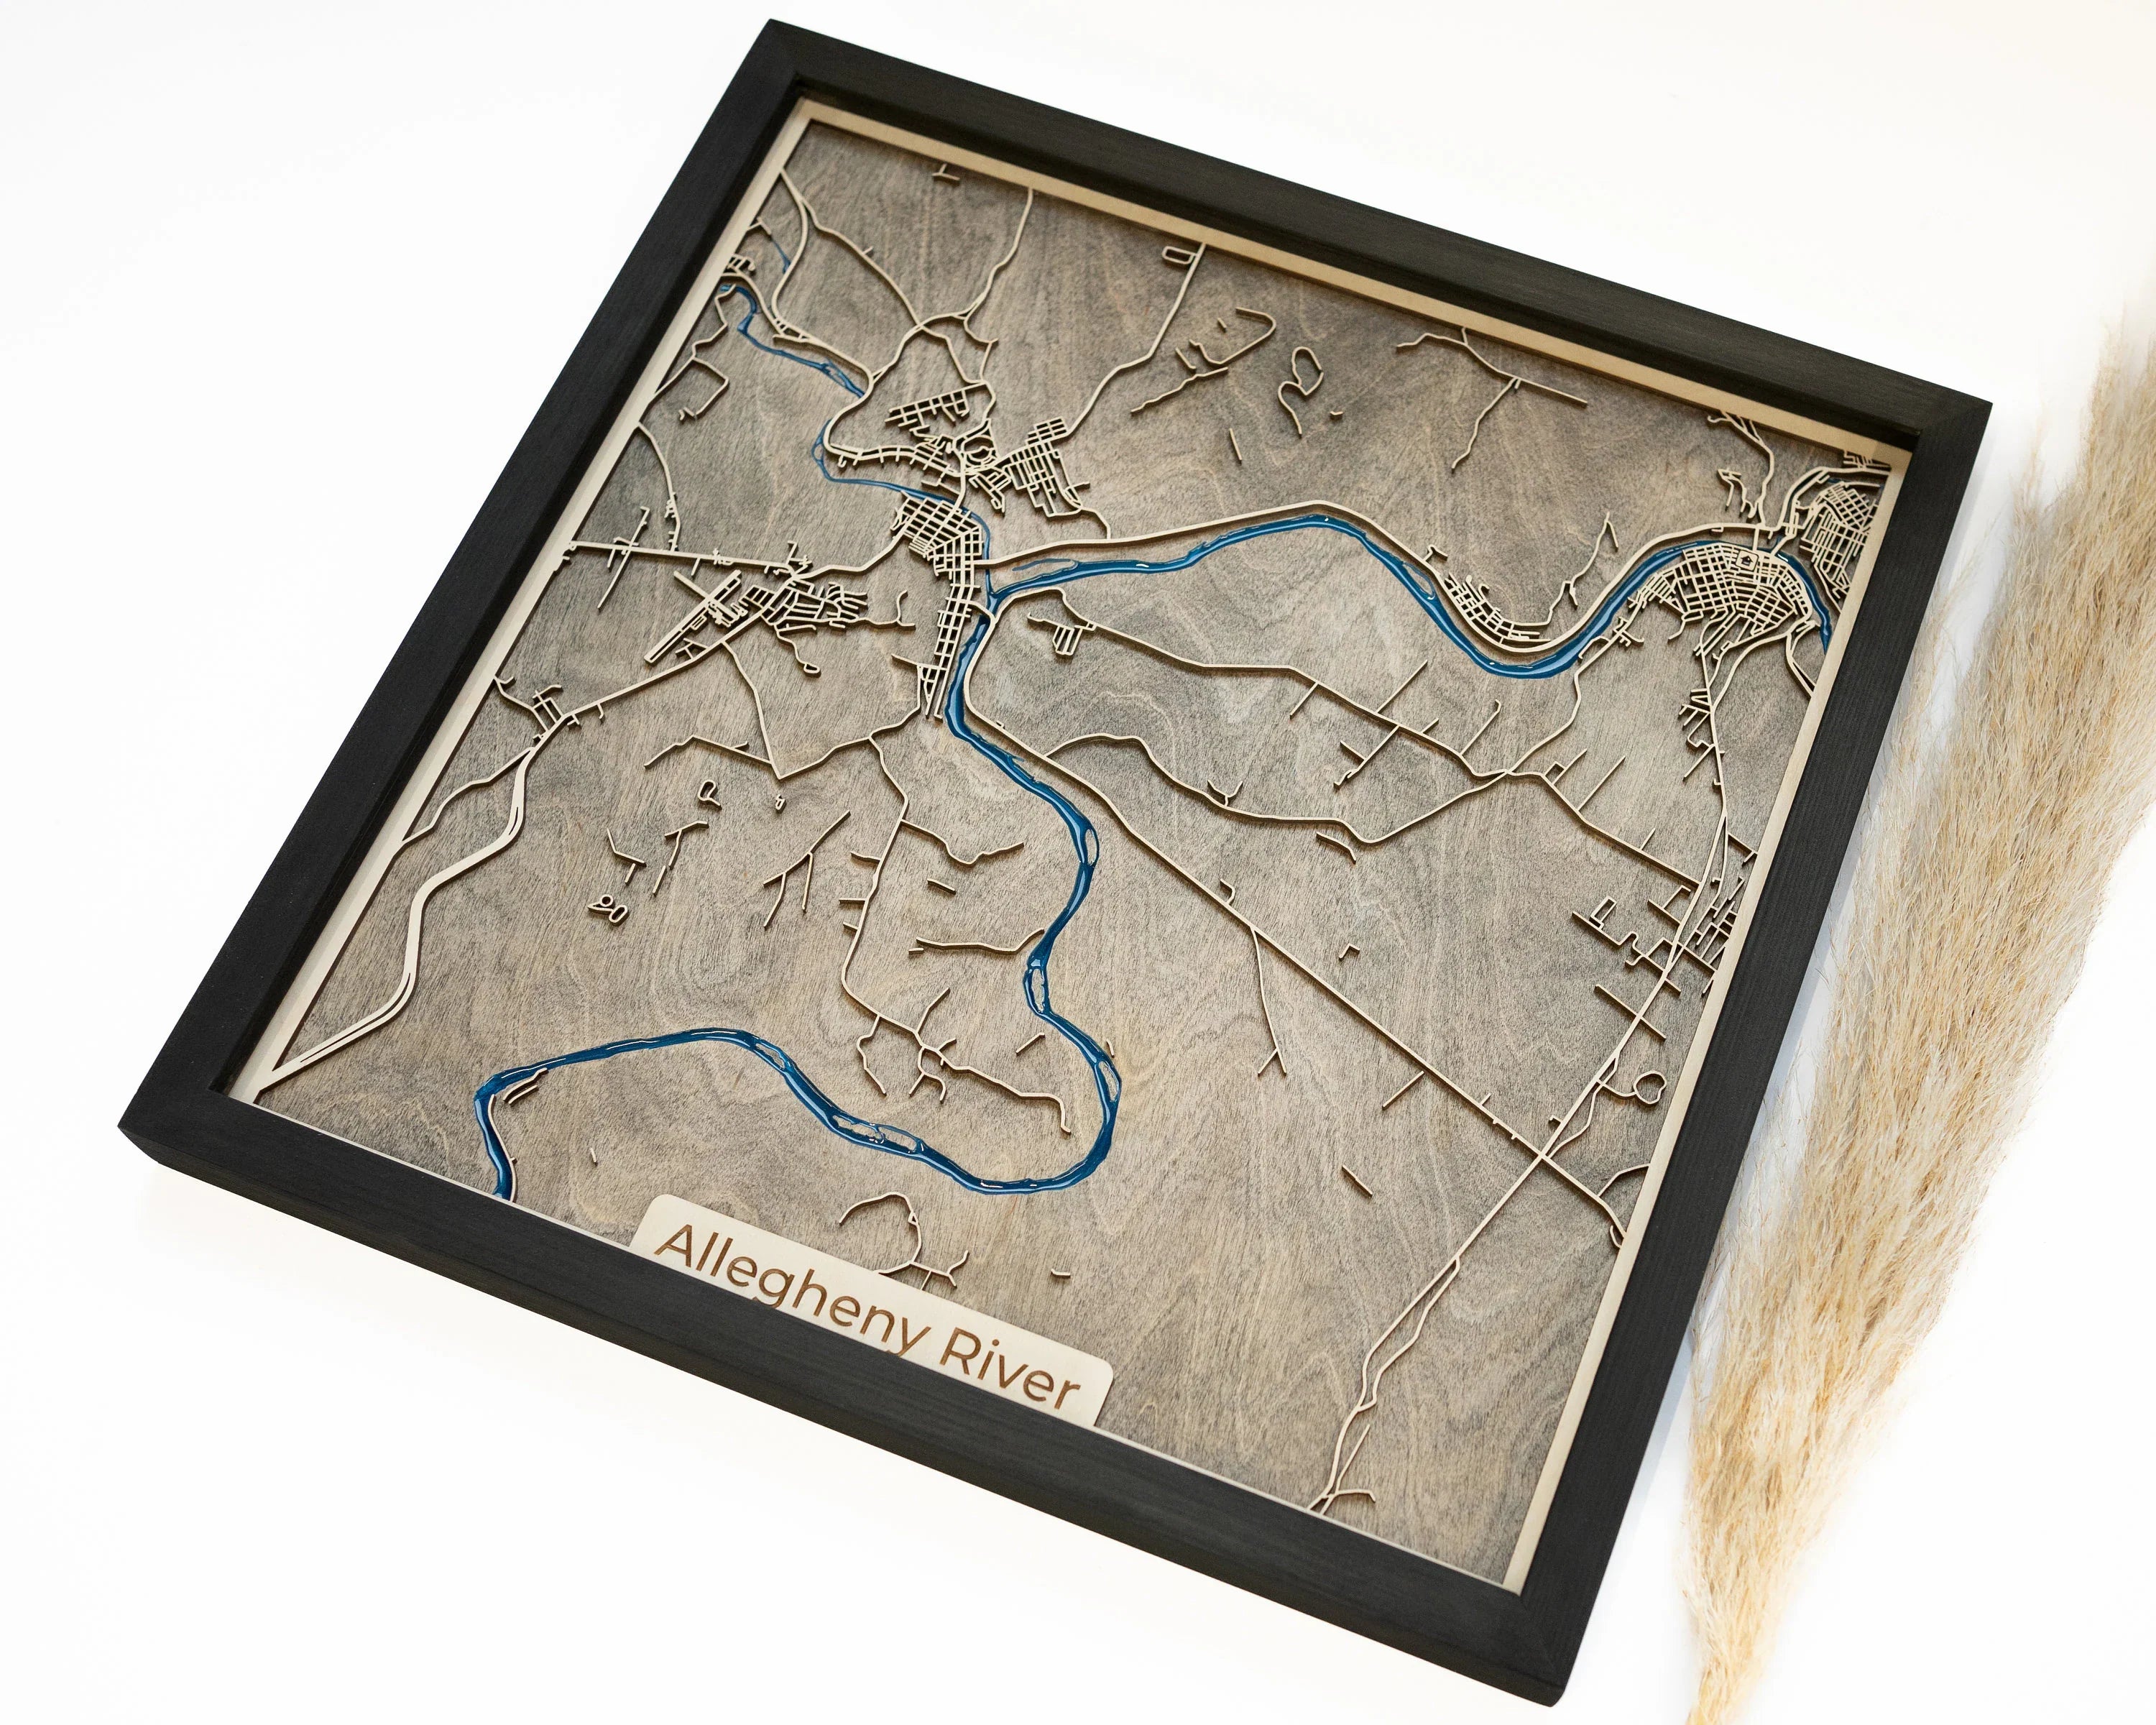 Allegheny River map